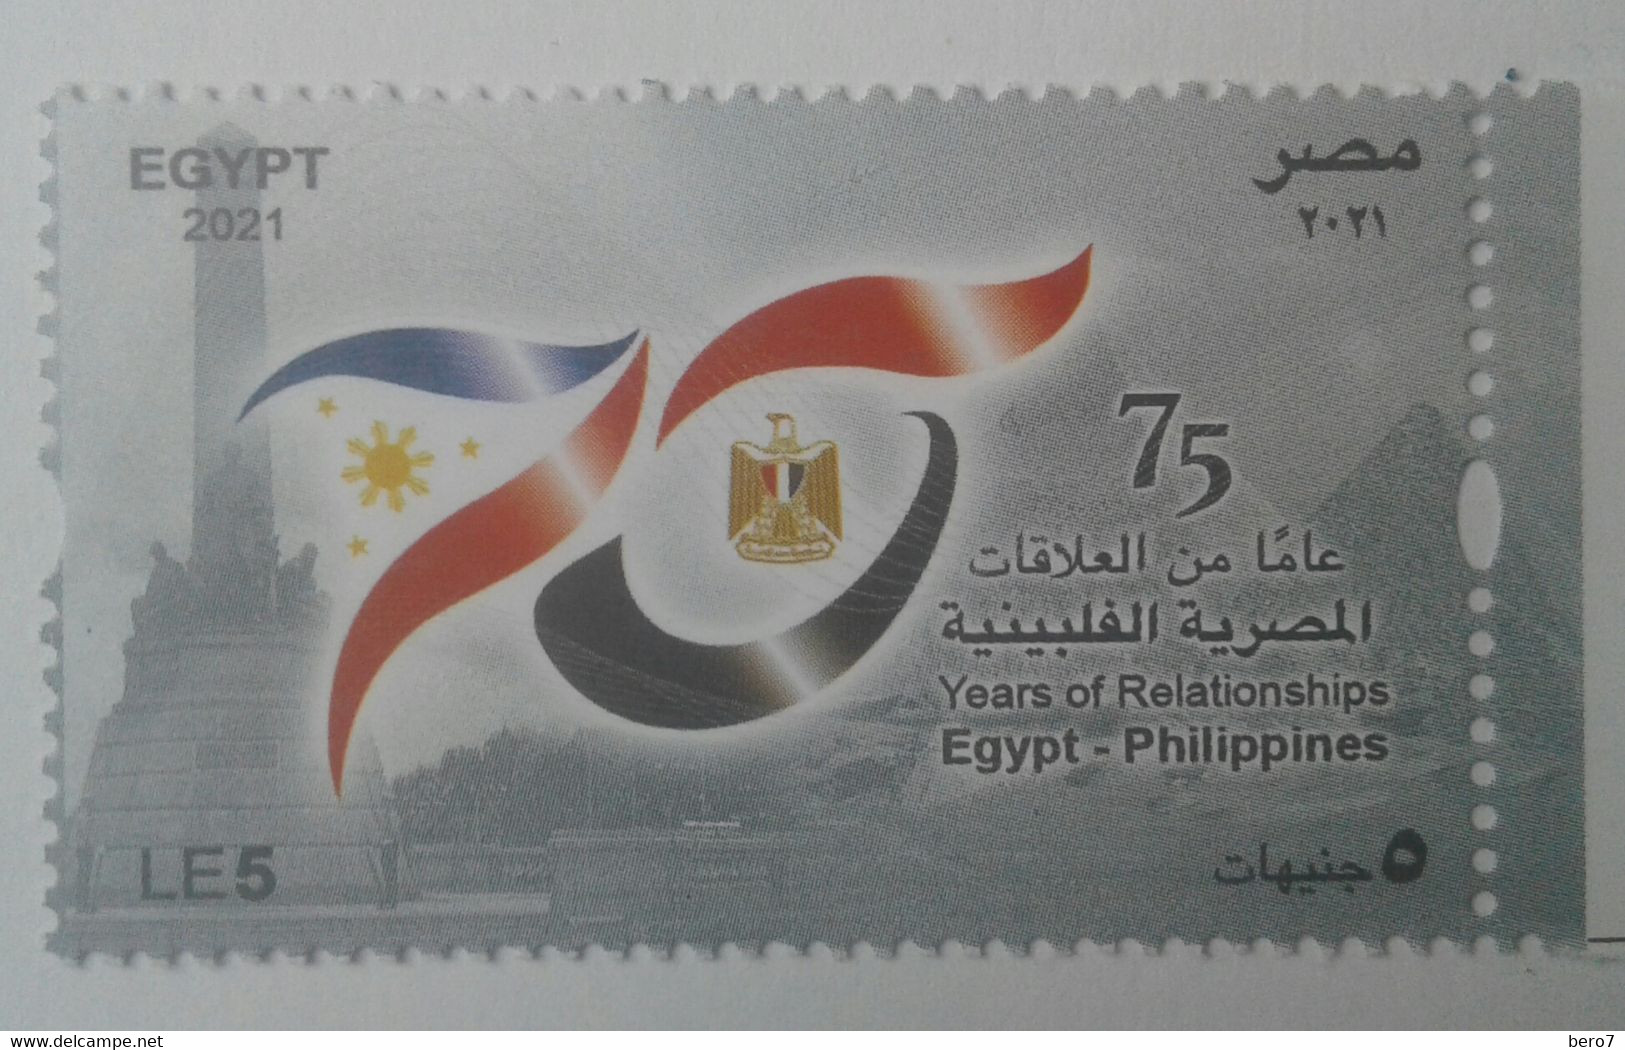 Egypt-Diplomatic Relations With The Philippines, 75th Anniversary- (Unused) (MNH) - [2021] (Egypte) (Egitto) (Ägypten) - Neufs